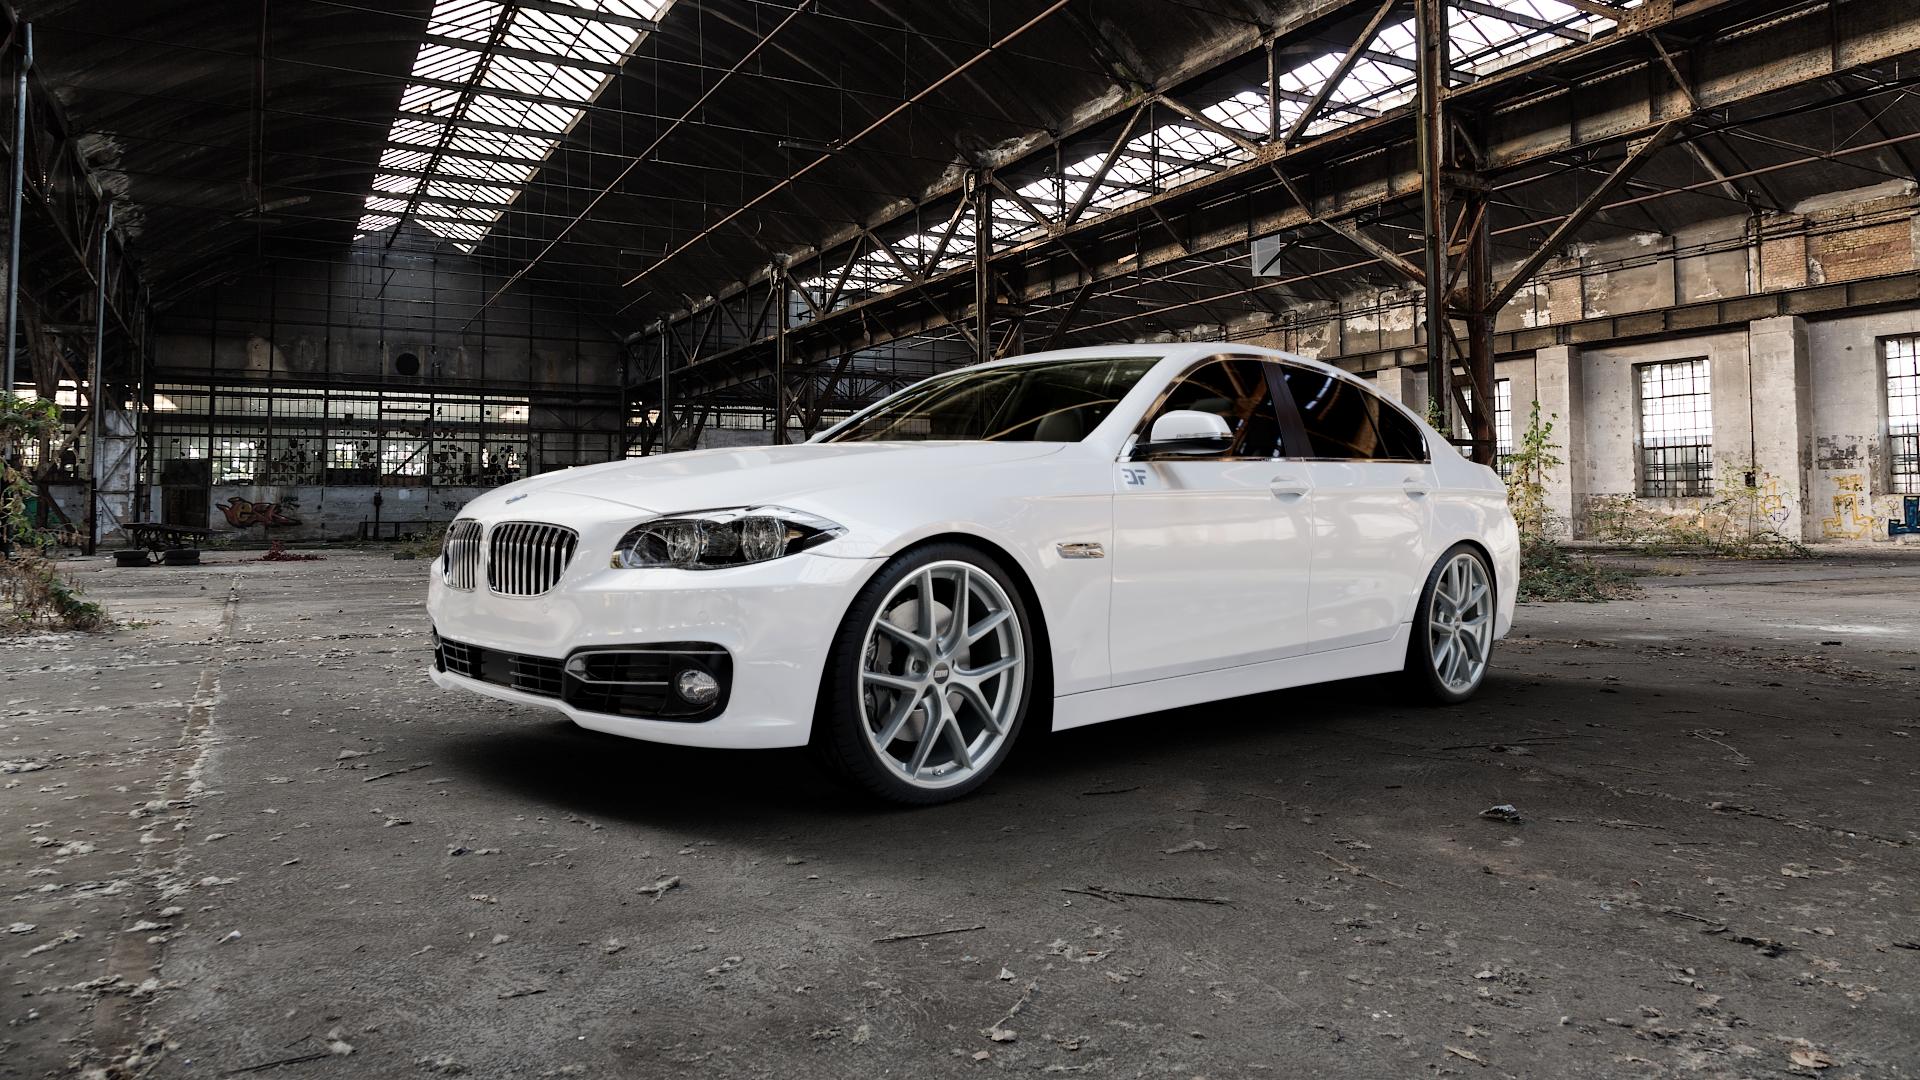 BMW 530d xDrive Type F10 (Limousine) 3,0l 210kW (286 hp) Wheels and Tyre  Packages | velonity.com